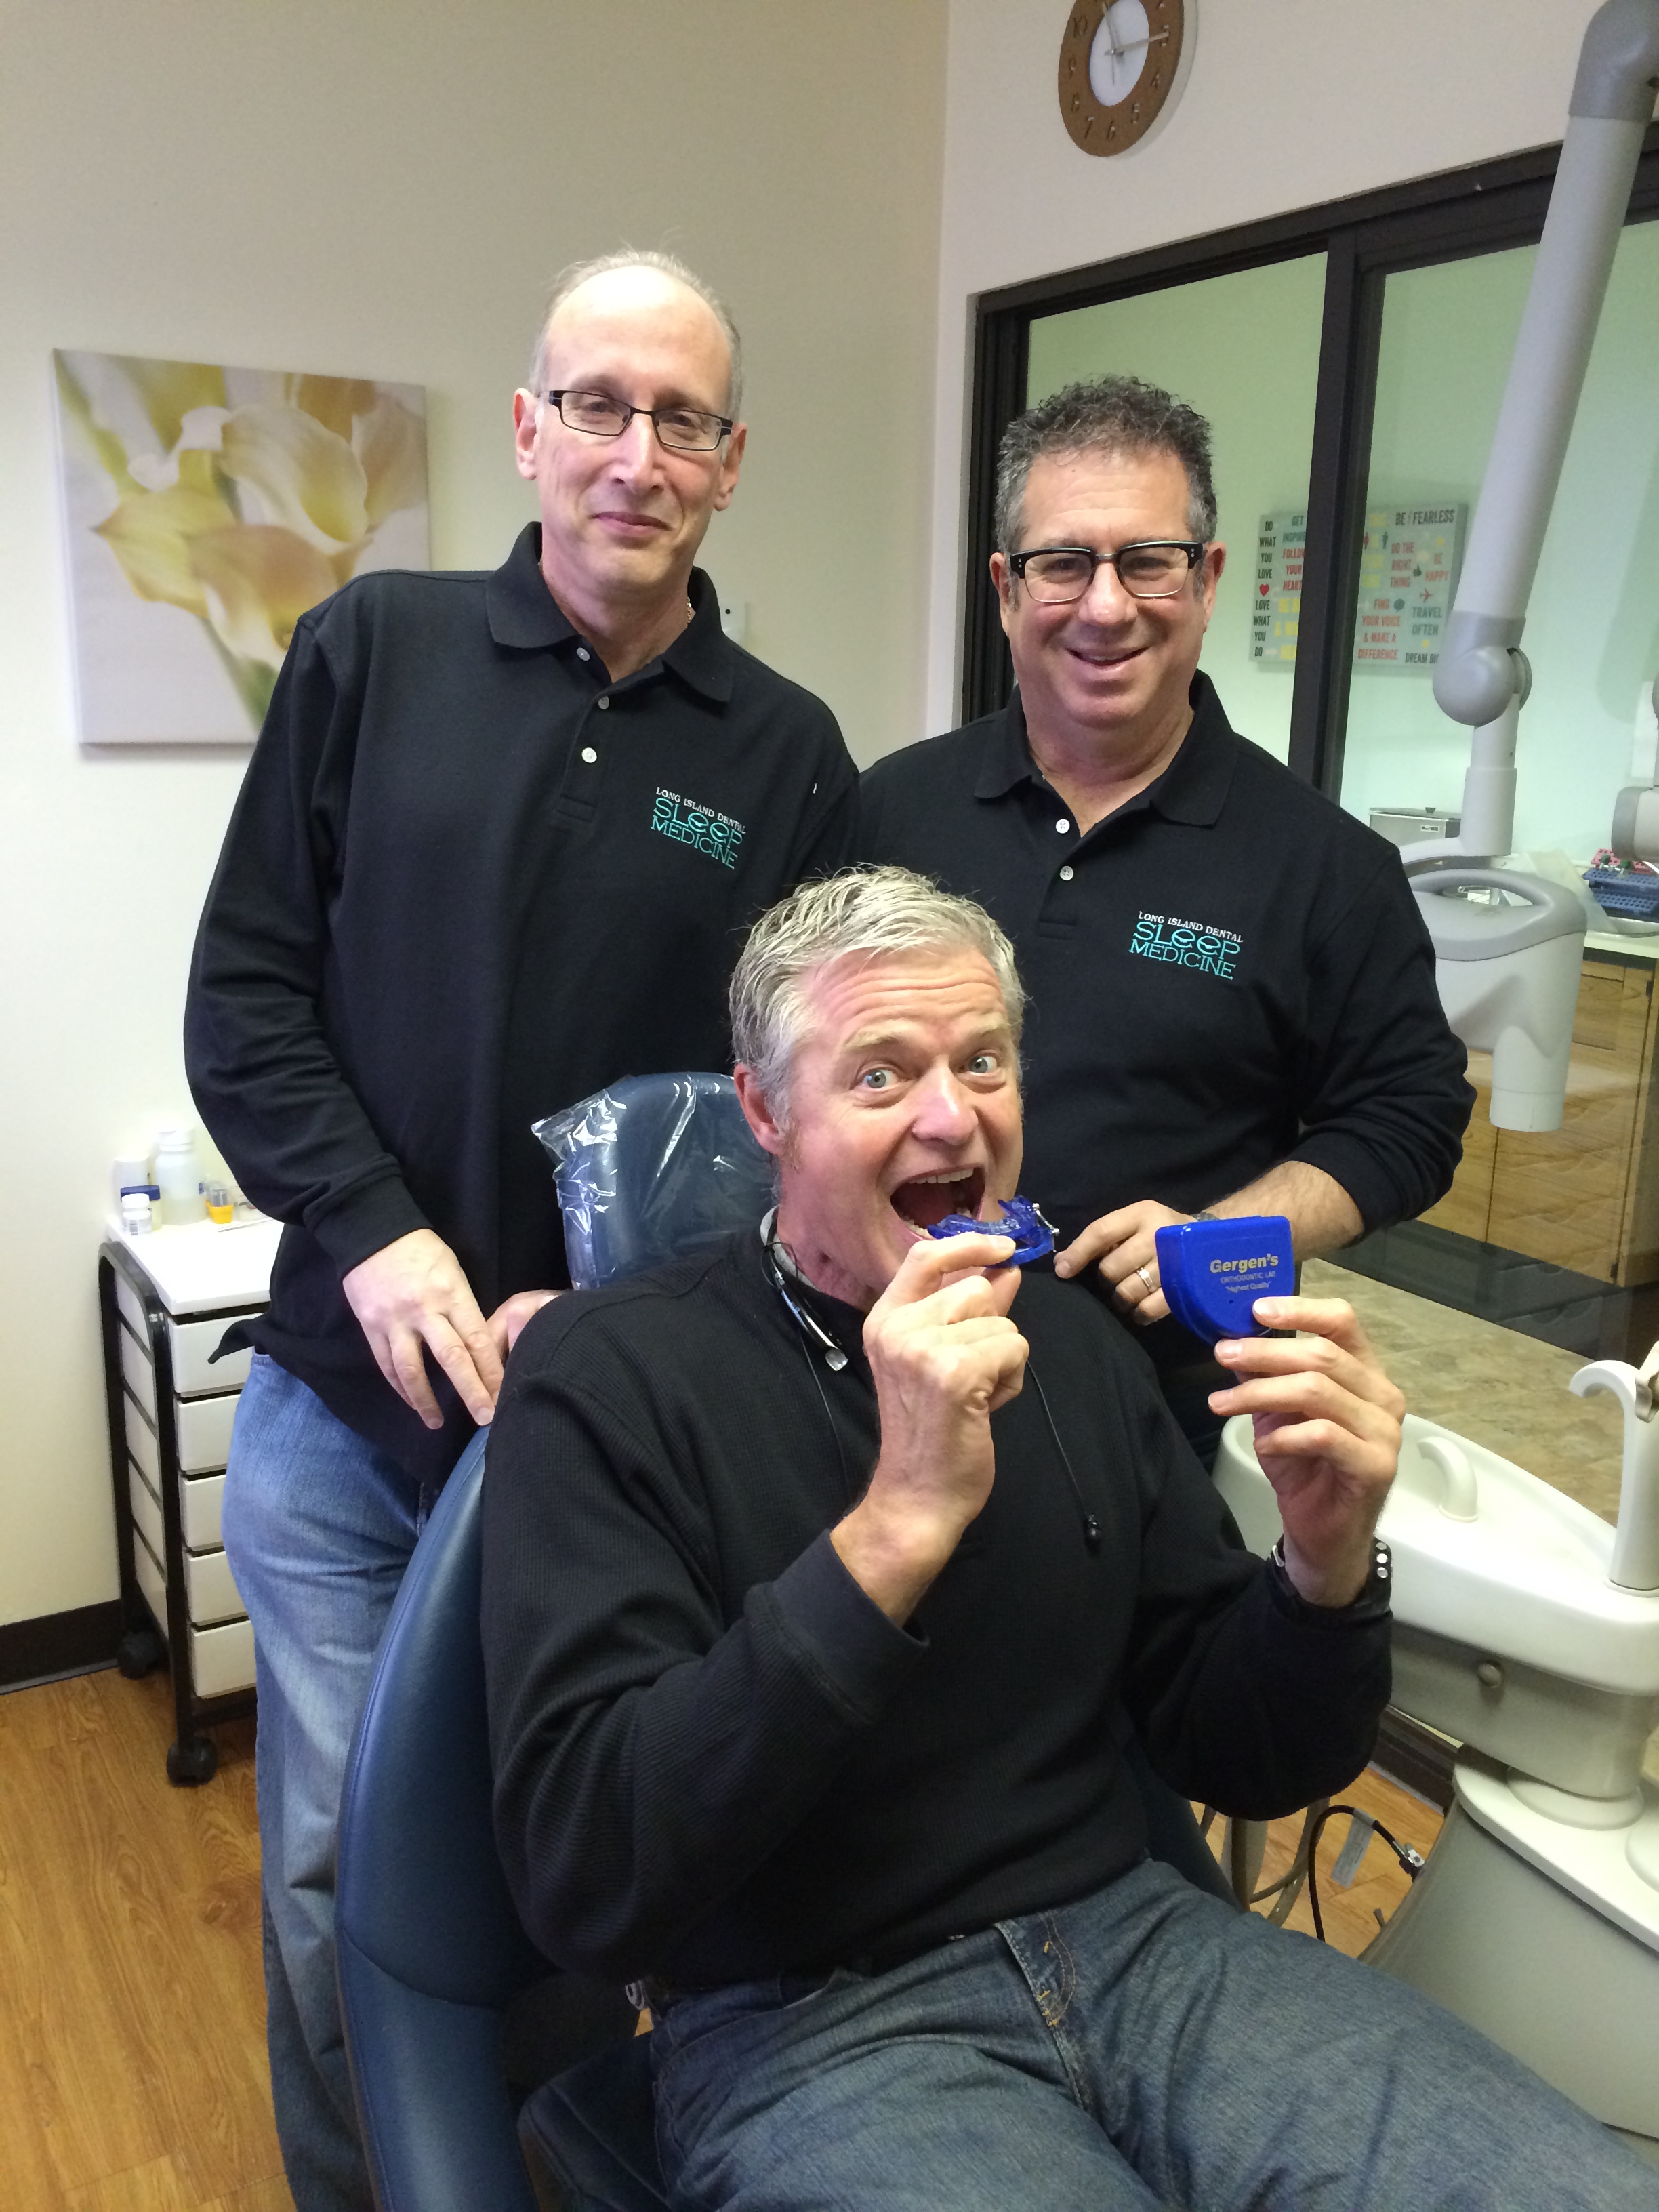 3-Time Super Bowl Champion Bart Oates With His Oral Appliance For Sleep Apnea